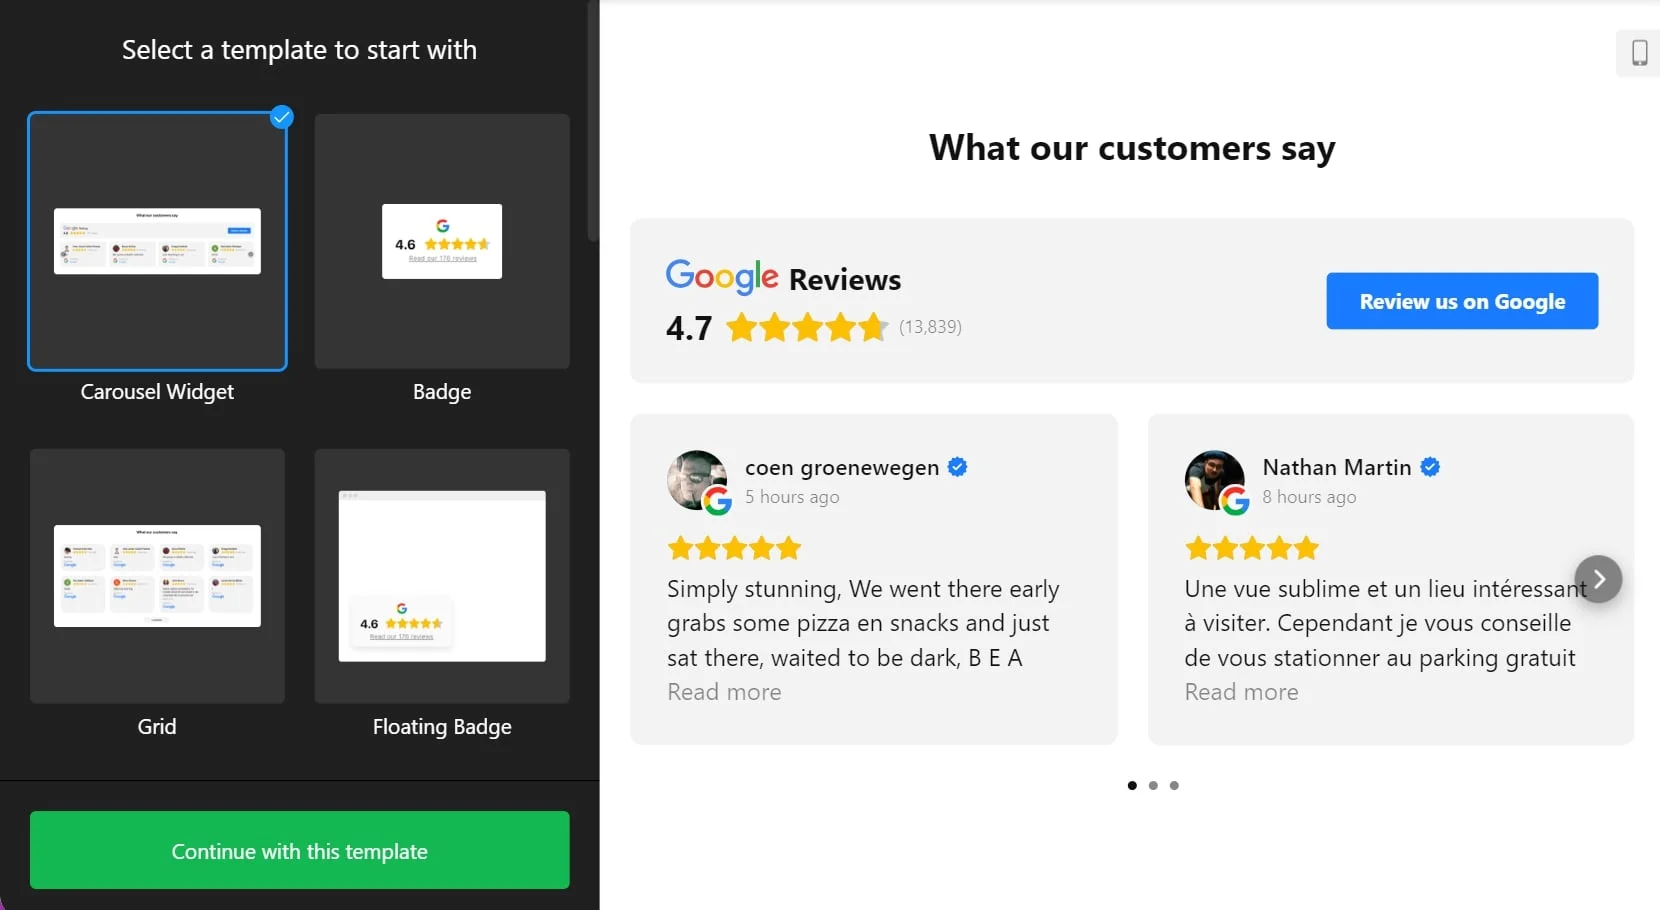 Select a Google Reviews template to start with